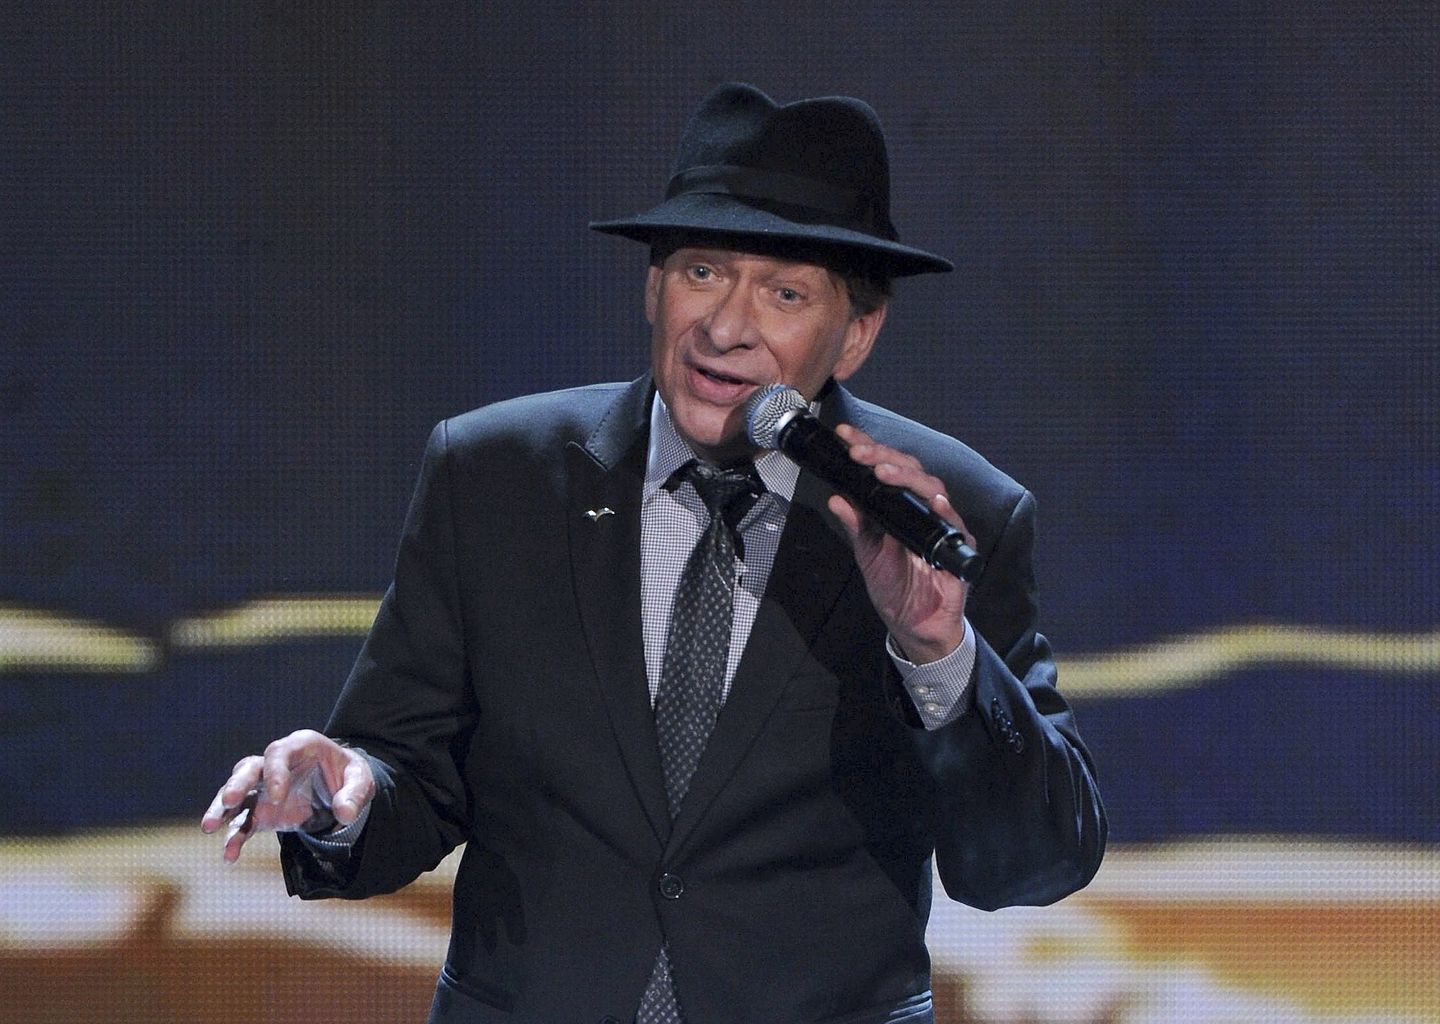 Bobby Caldwell, 'What You Won't Do for Love' singer, dies